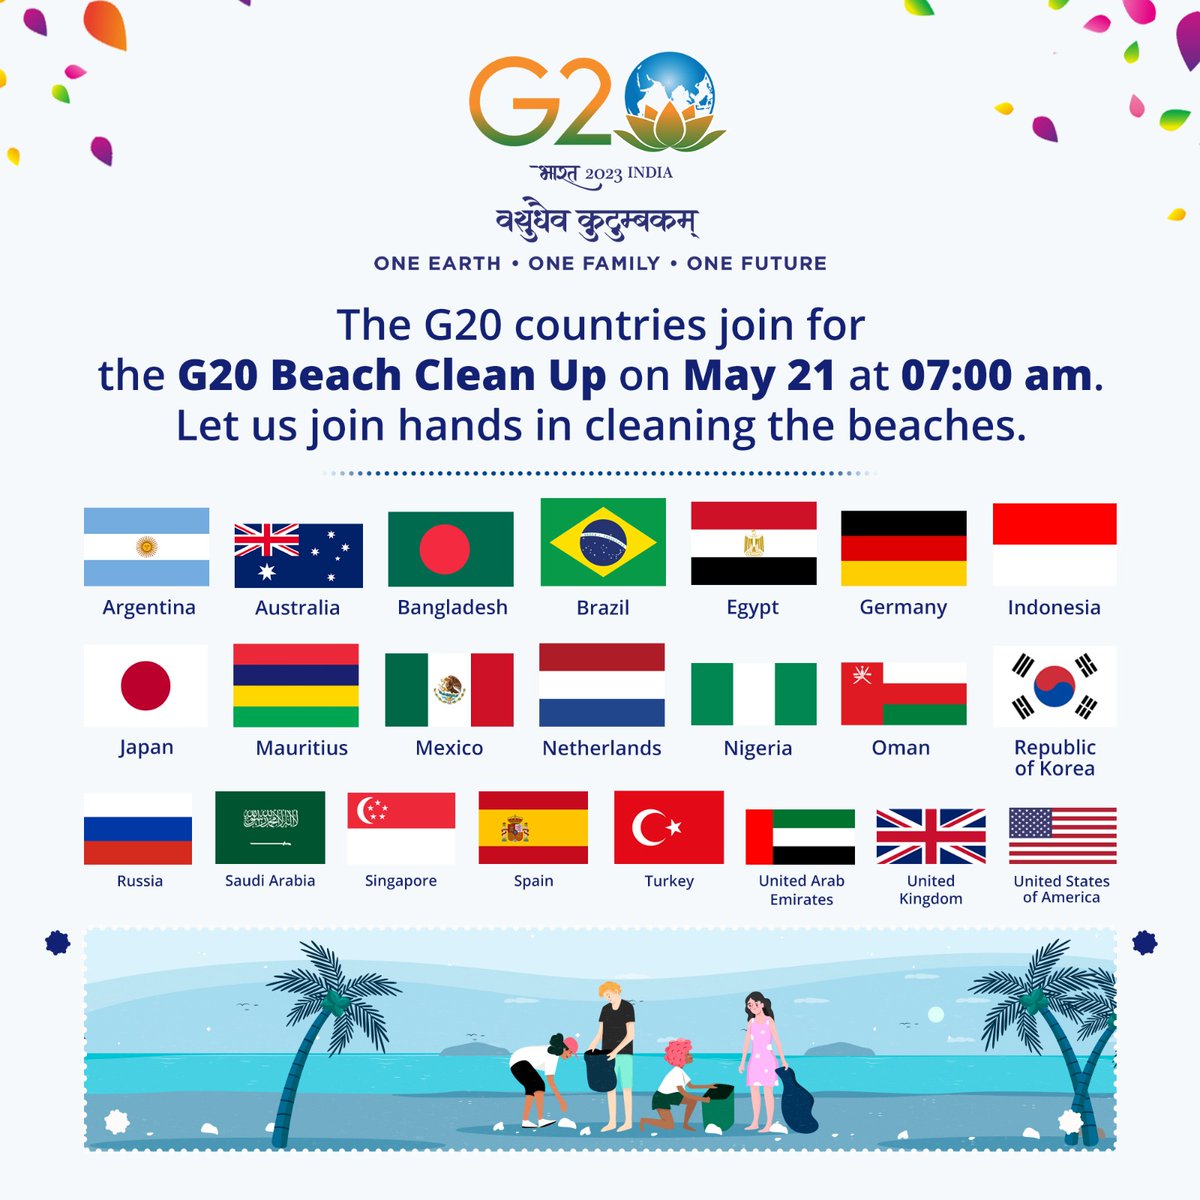 A Healthy Ocean makes for a Healthy Planet!

#G20 #SustainableLifestyle #G20ForOceans #G20BeachCleanUp

@g20org